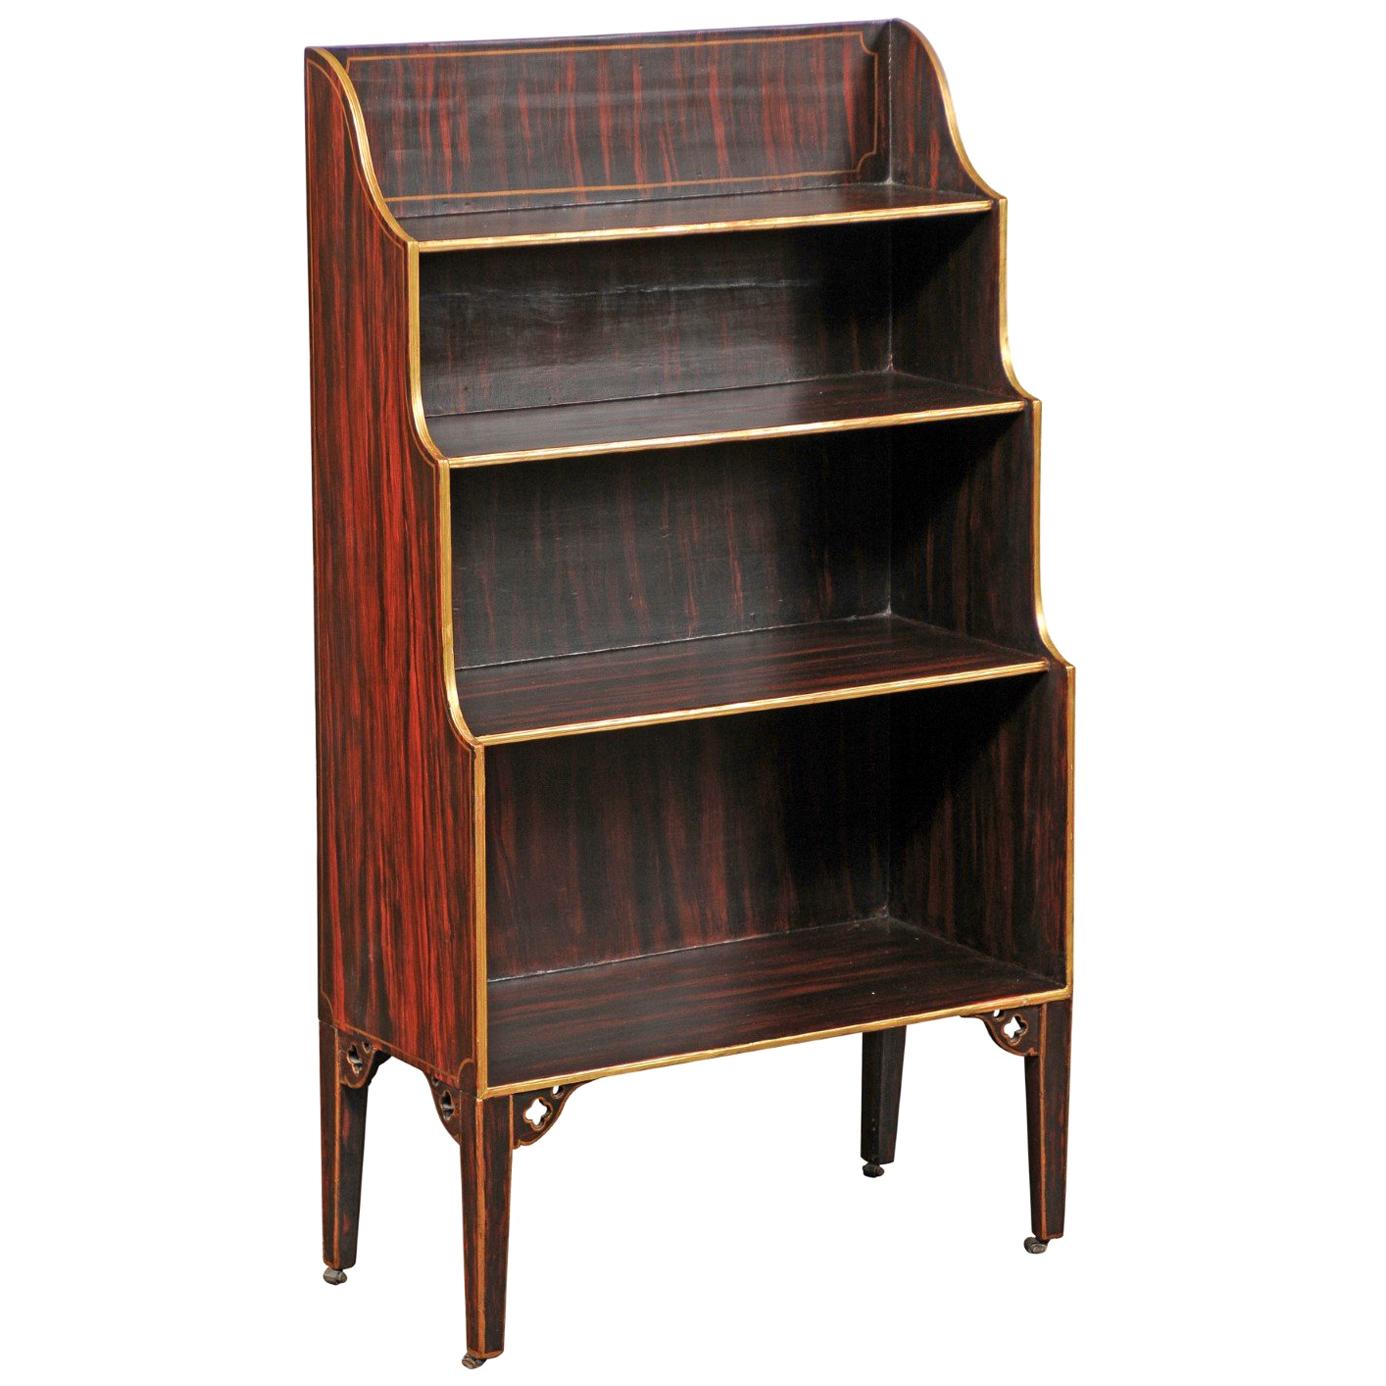 English 1850s Faux-Painted Waterfall Bookcase with Gilt Accents and Tapered Legs